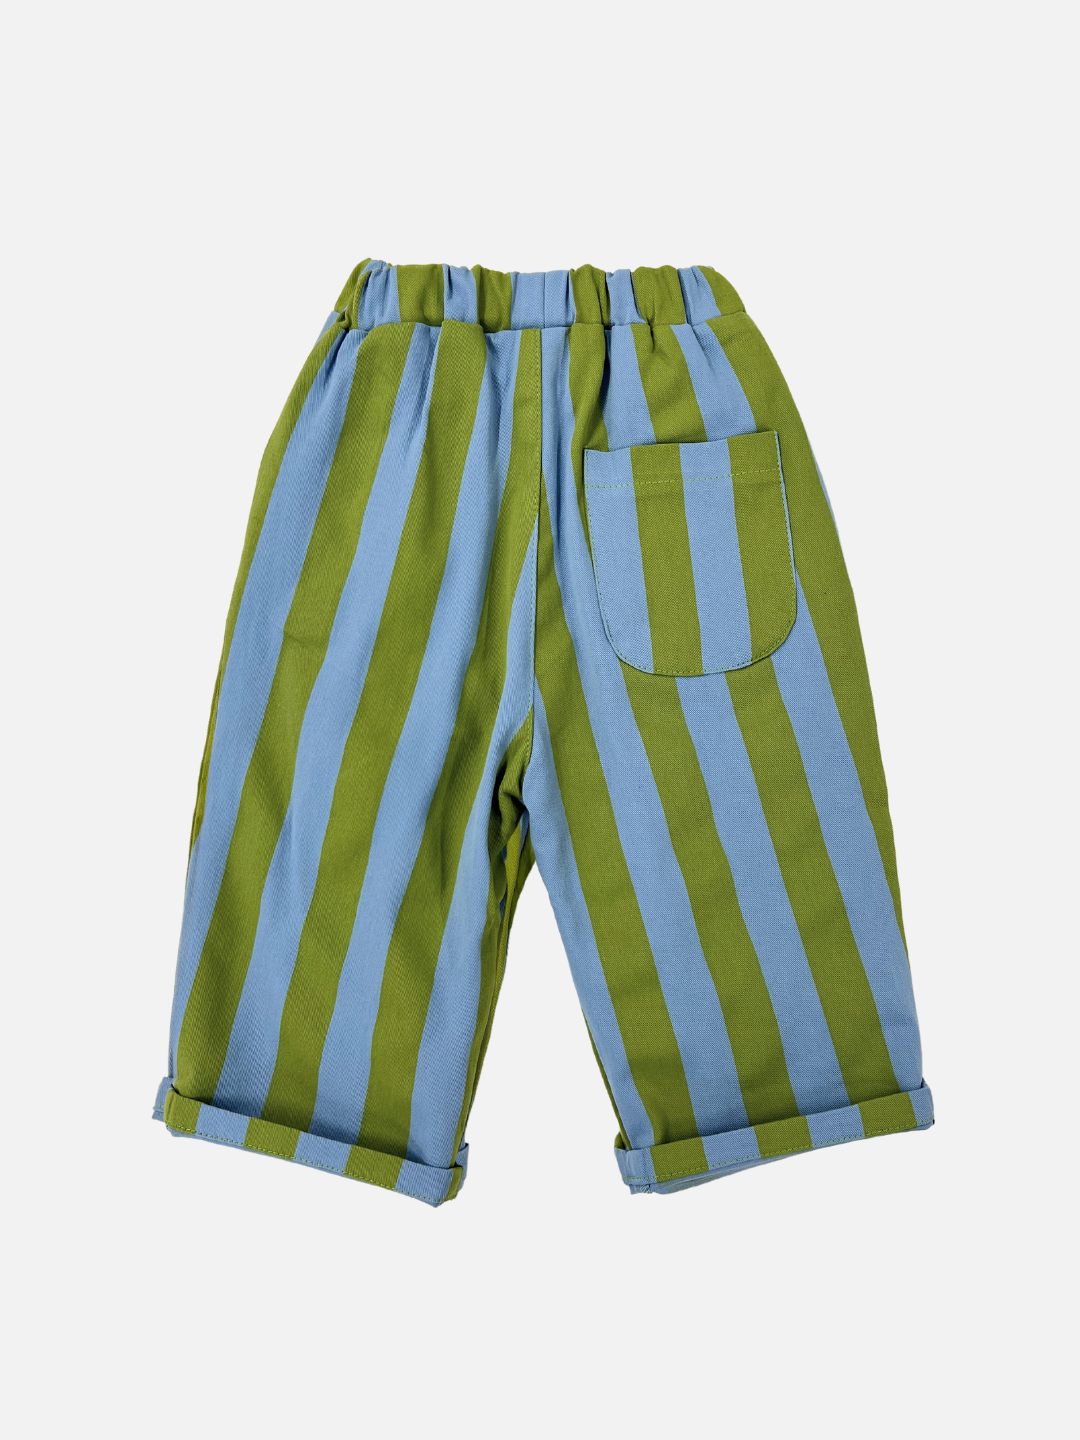 Back view of kids baggy pants in blue with wide green vertical stripes.